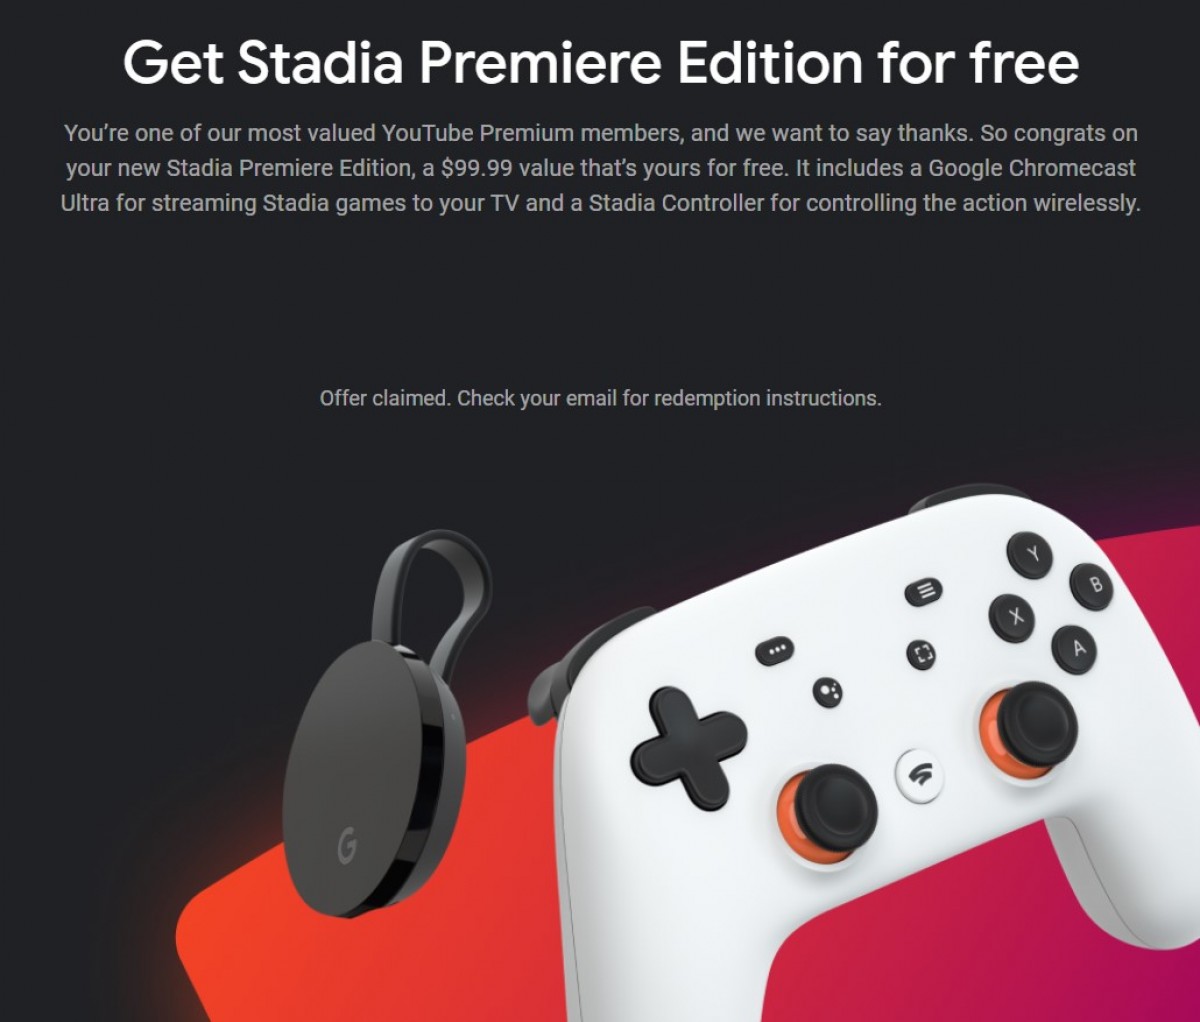 Google offers free Stadia Premiere Edition bundle to YouTube Premium subscribers in US and UK